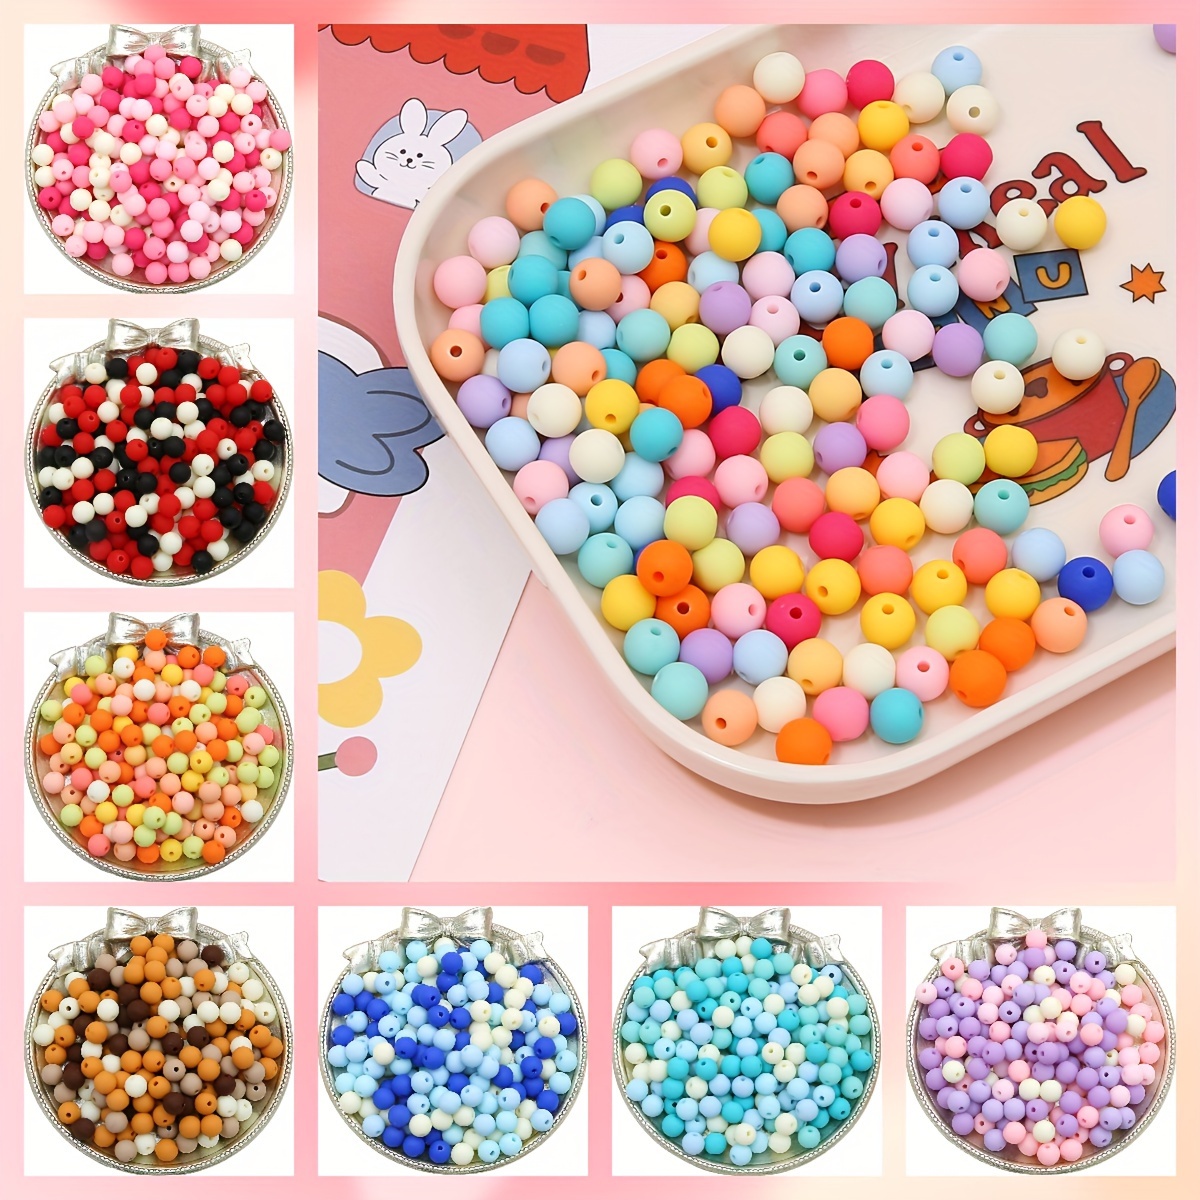 

30pcs 8mm Frosted Sugar Fruit Mixed Color Acrylic Round Loose Beads For Jewelry Making Diy Handmade Beaded Couple Bracelets Necklaces Phone Bag Chains Handicrafts Supplies